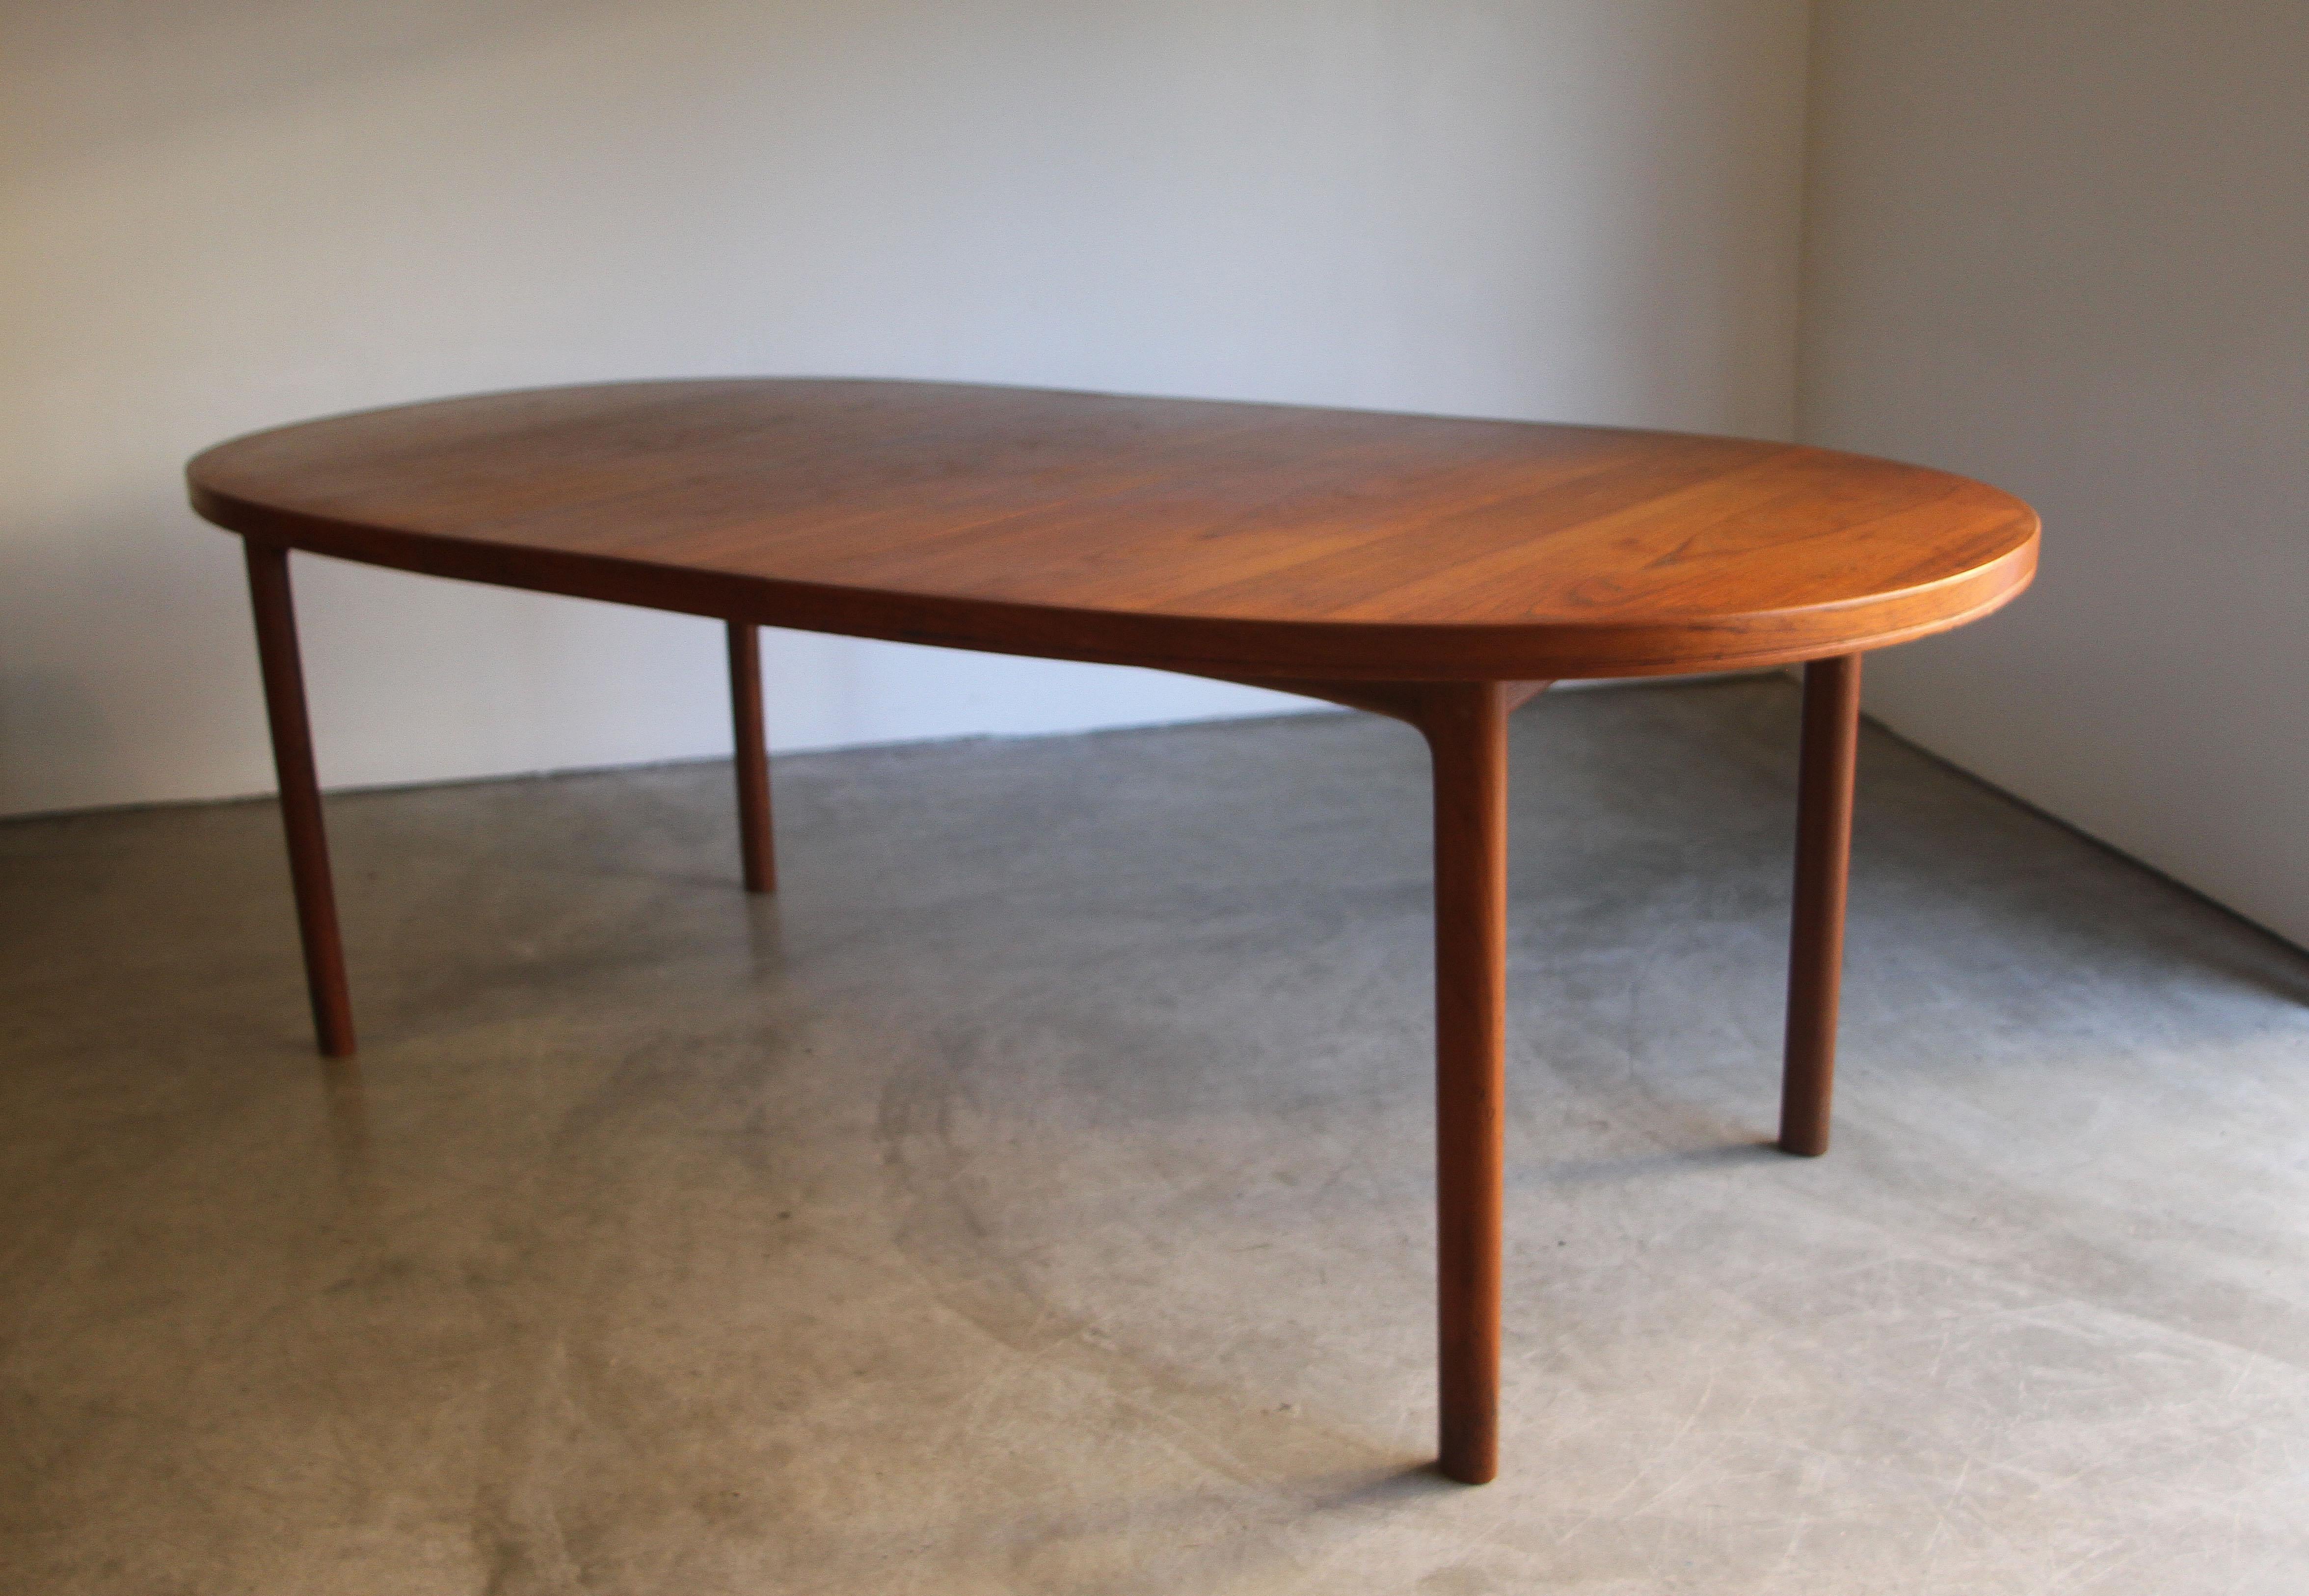 20th Century Swedish Midcentury Dining Table with 2 Leaves